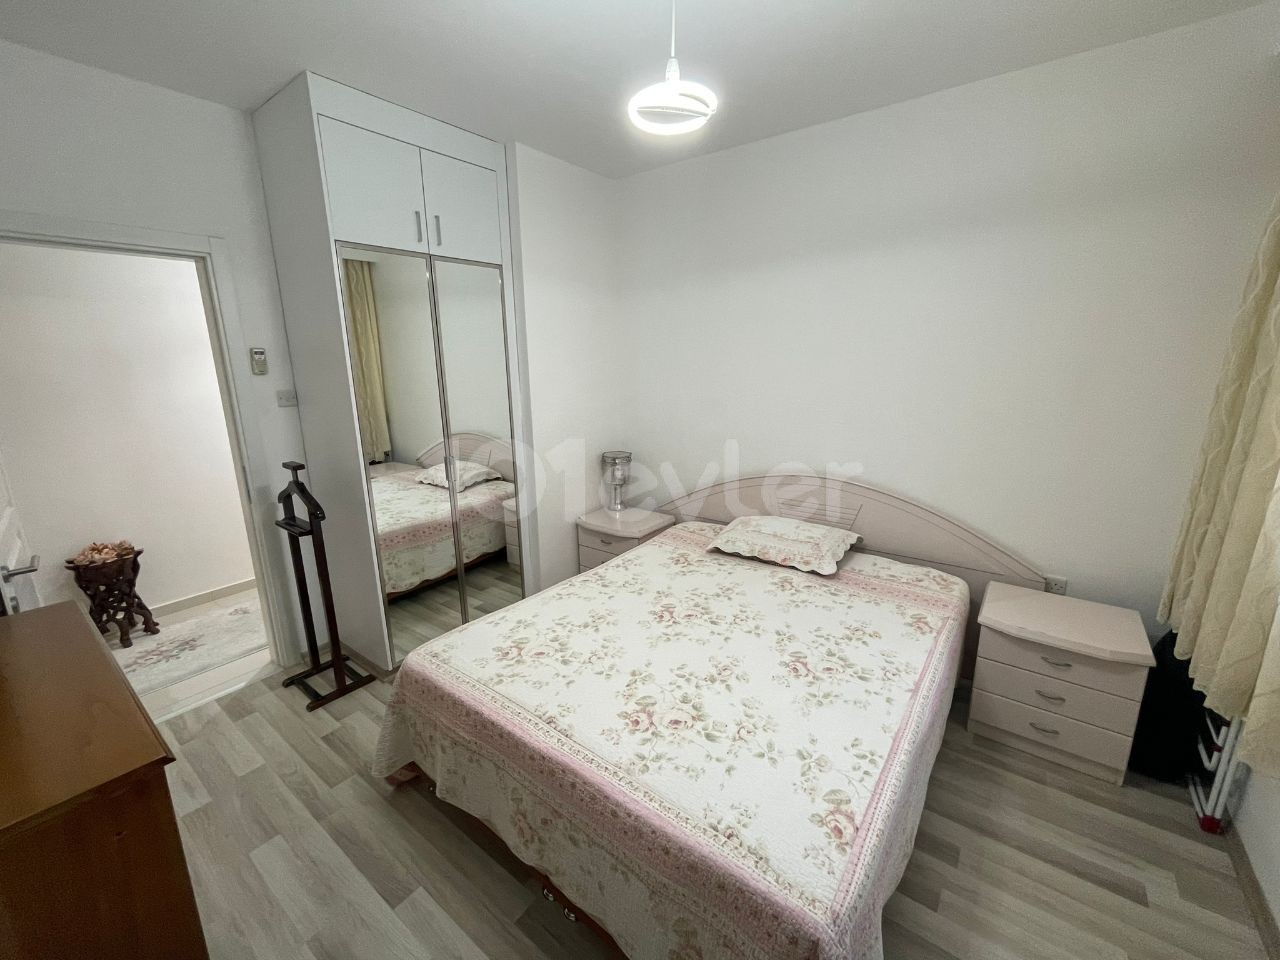 2+1 FURNISHED APARTMENT IN A SECURE COMPLEX IN THE CENTER OF KYRENIA